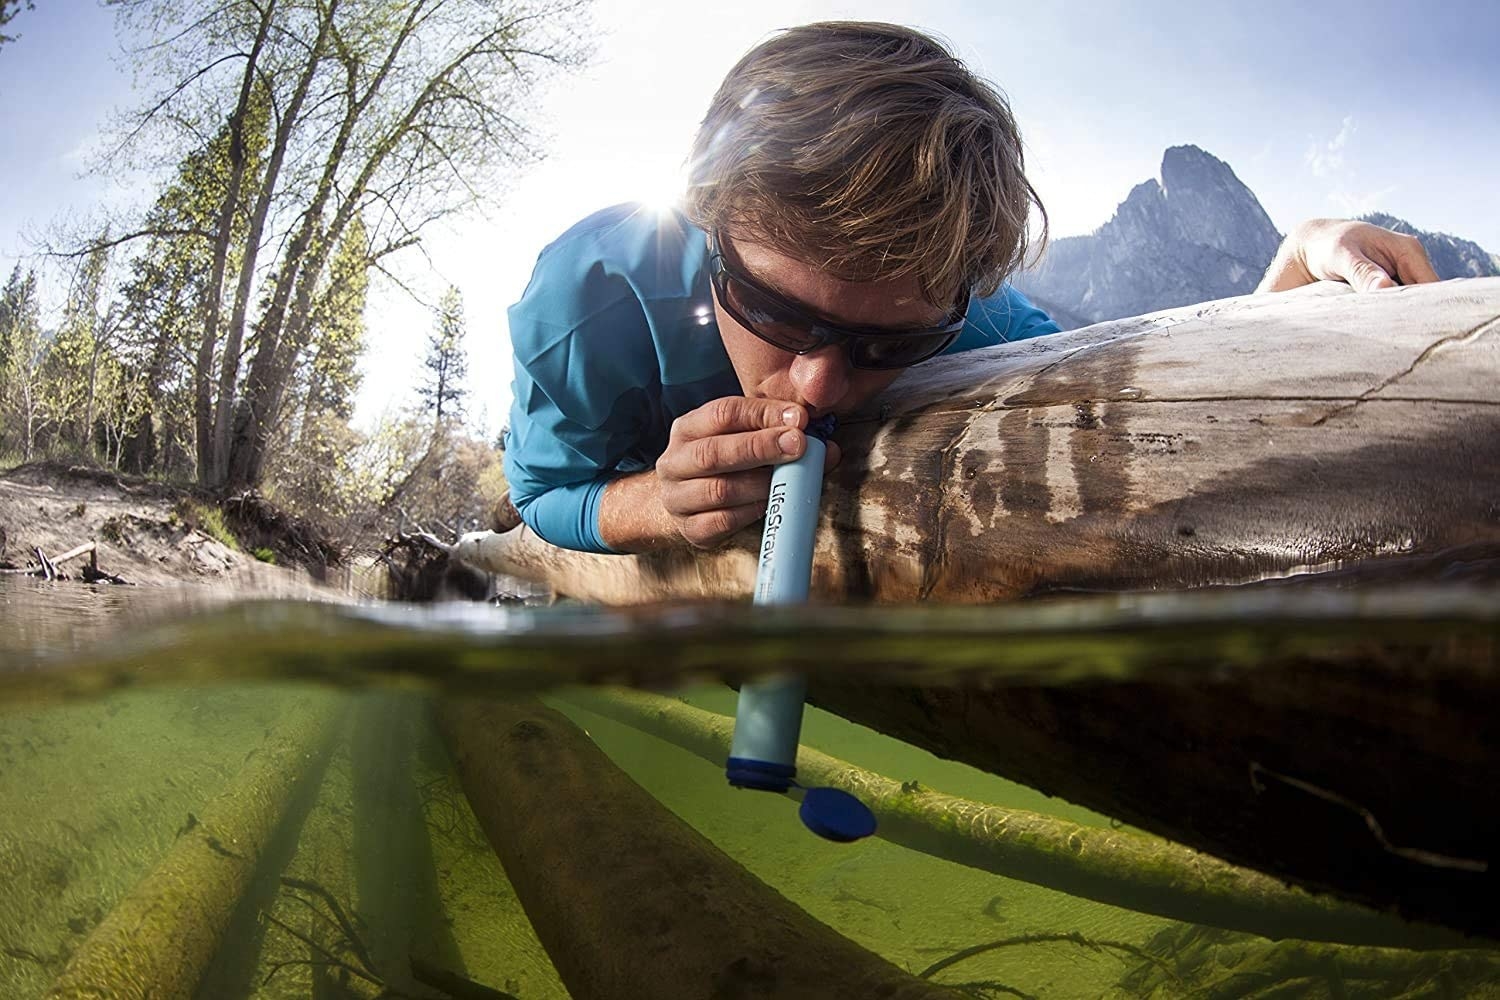 model users blue LifeStraw to drink water out of stream